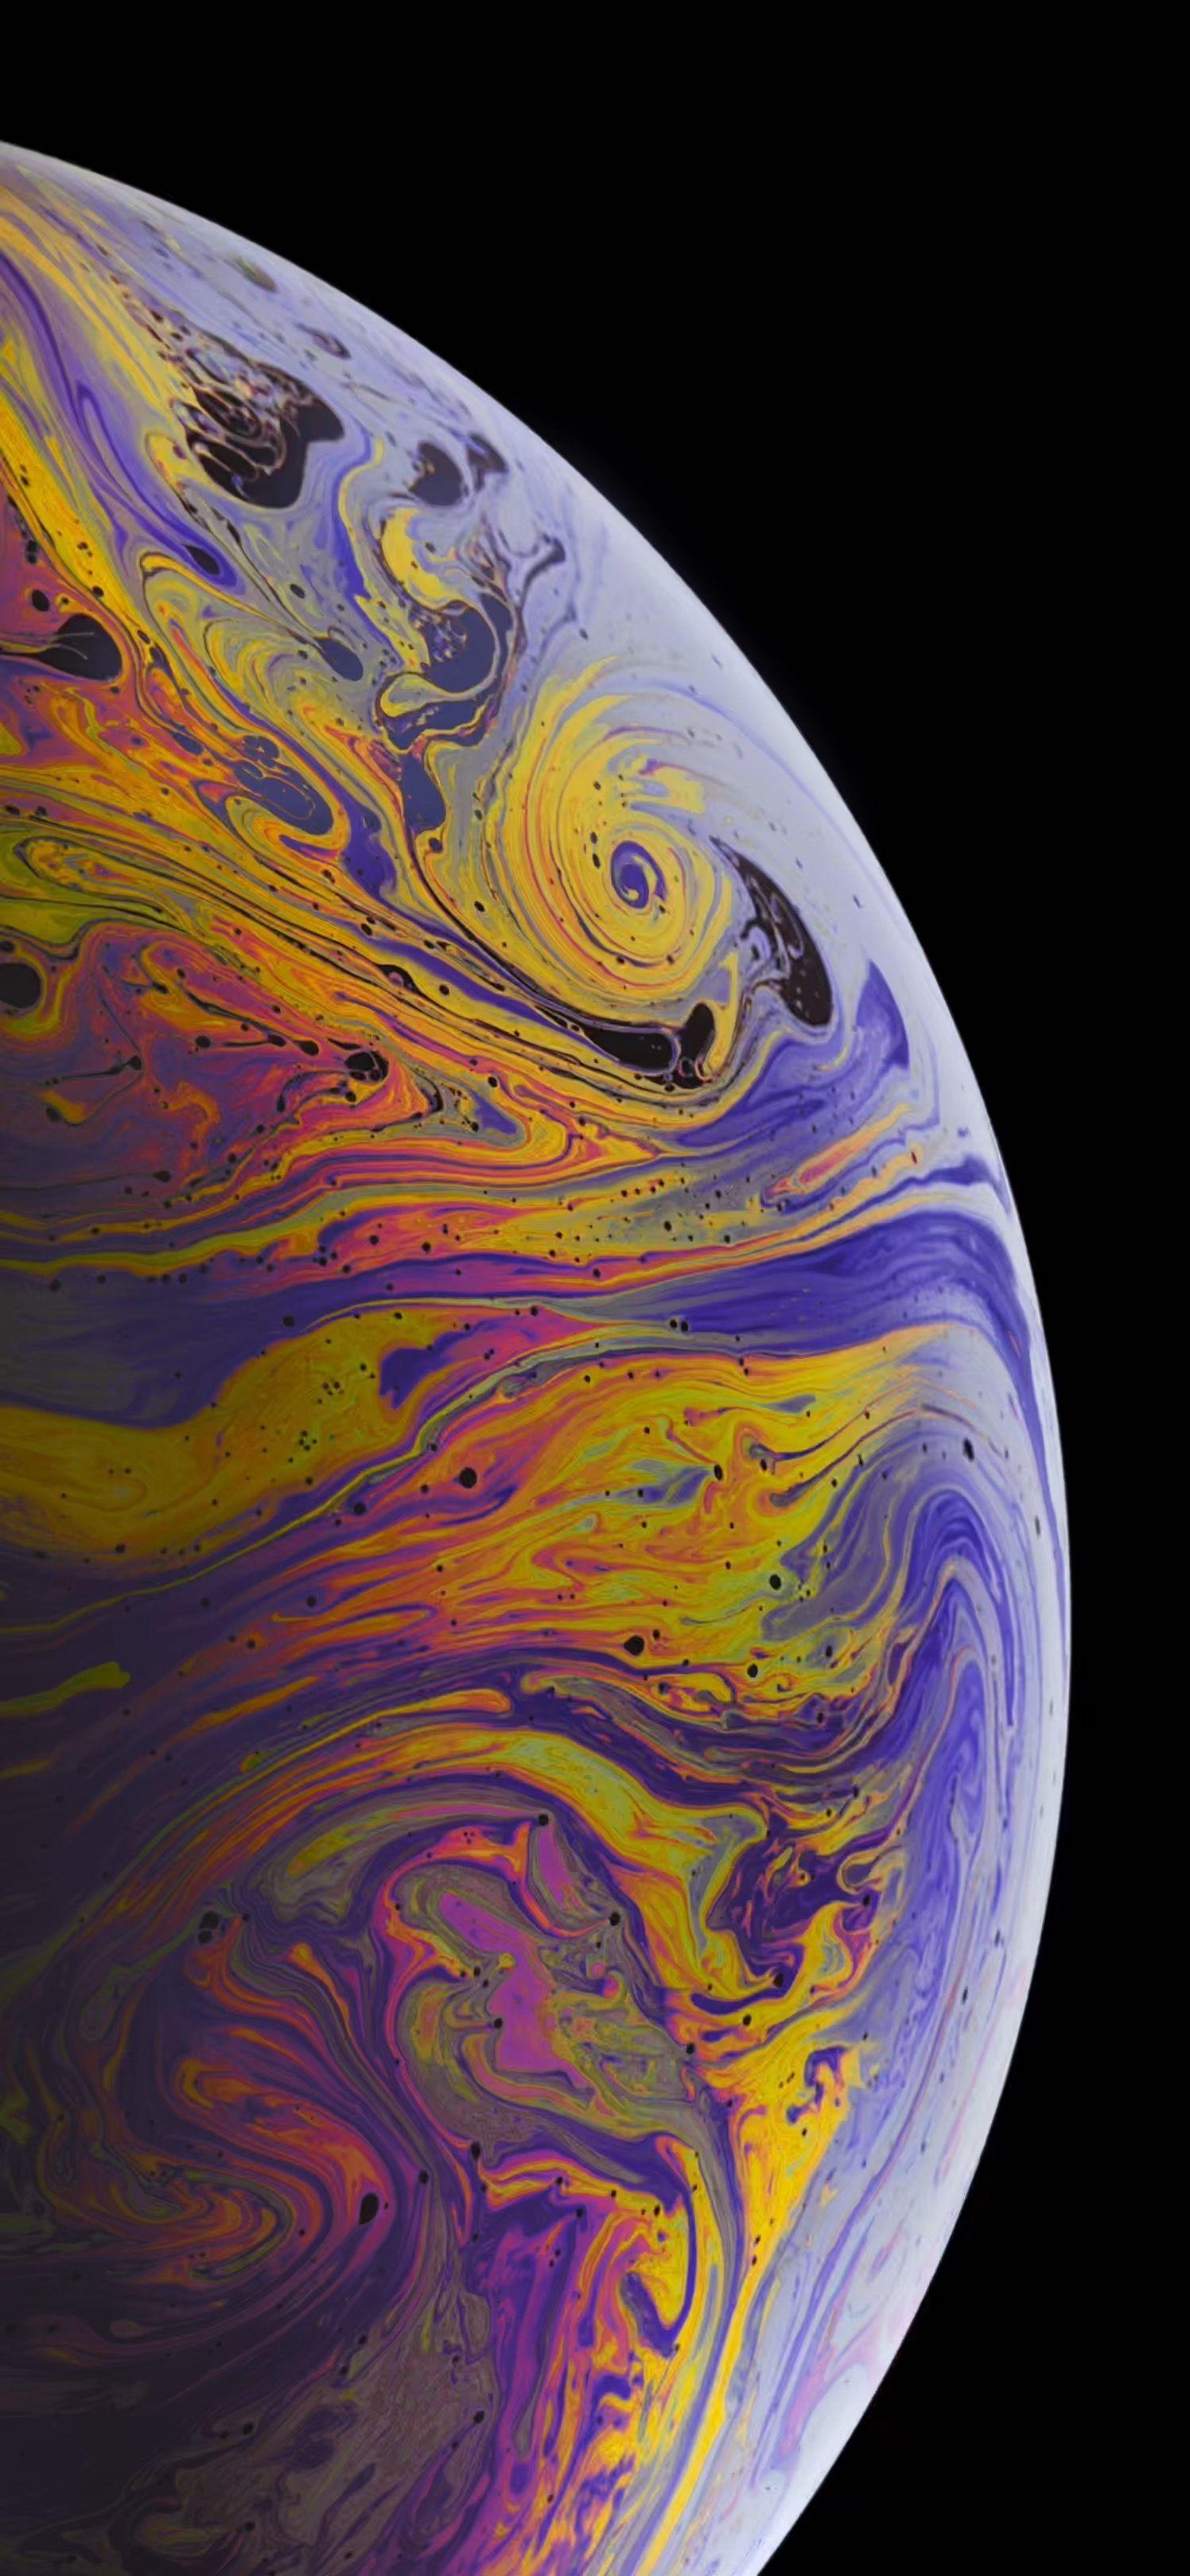 Download the new iPhone Xs and iPhone Xs Max wallpaper right here